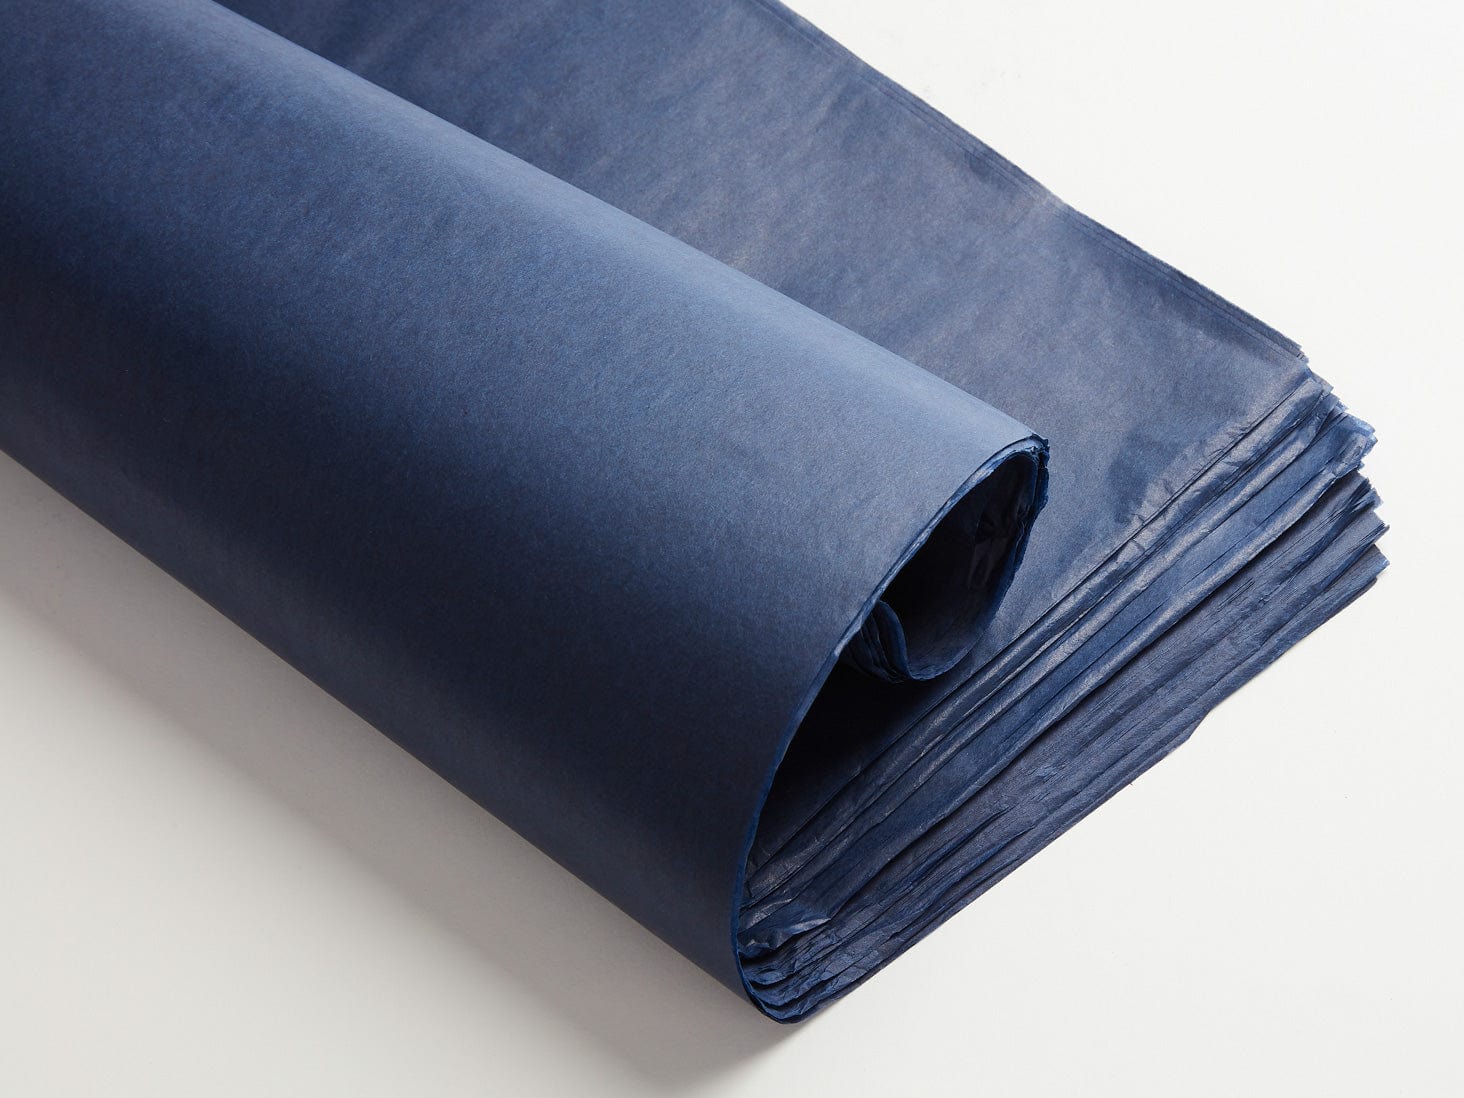 Luxury Tissue Paper - Navy Blue 240 Sheets 🎁